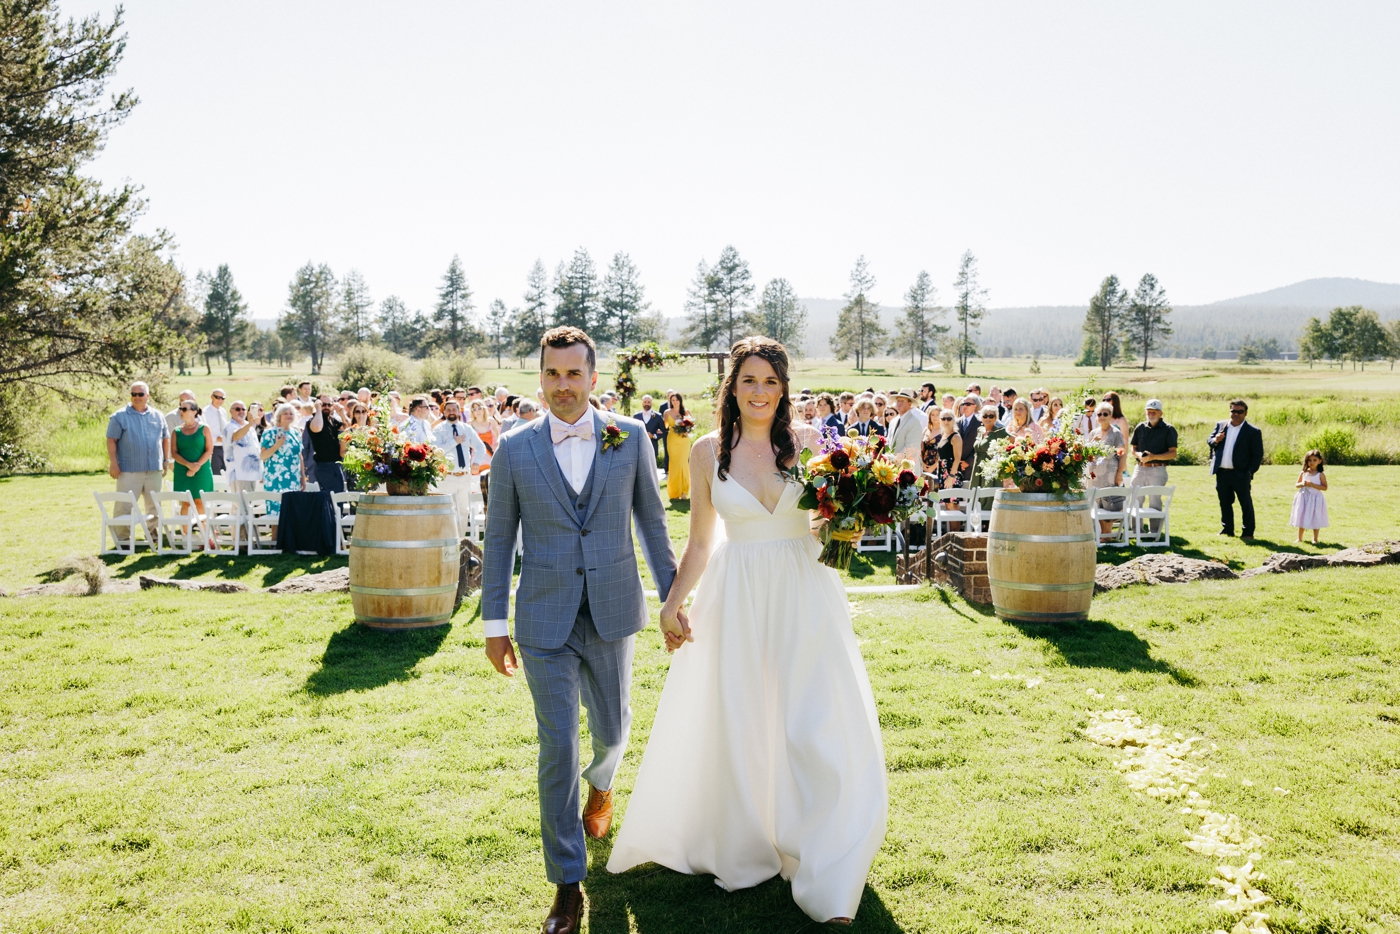 Wedding planning timeline examples, featuring a wedding at Sunriver Resort in Oregon